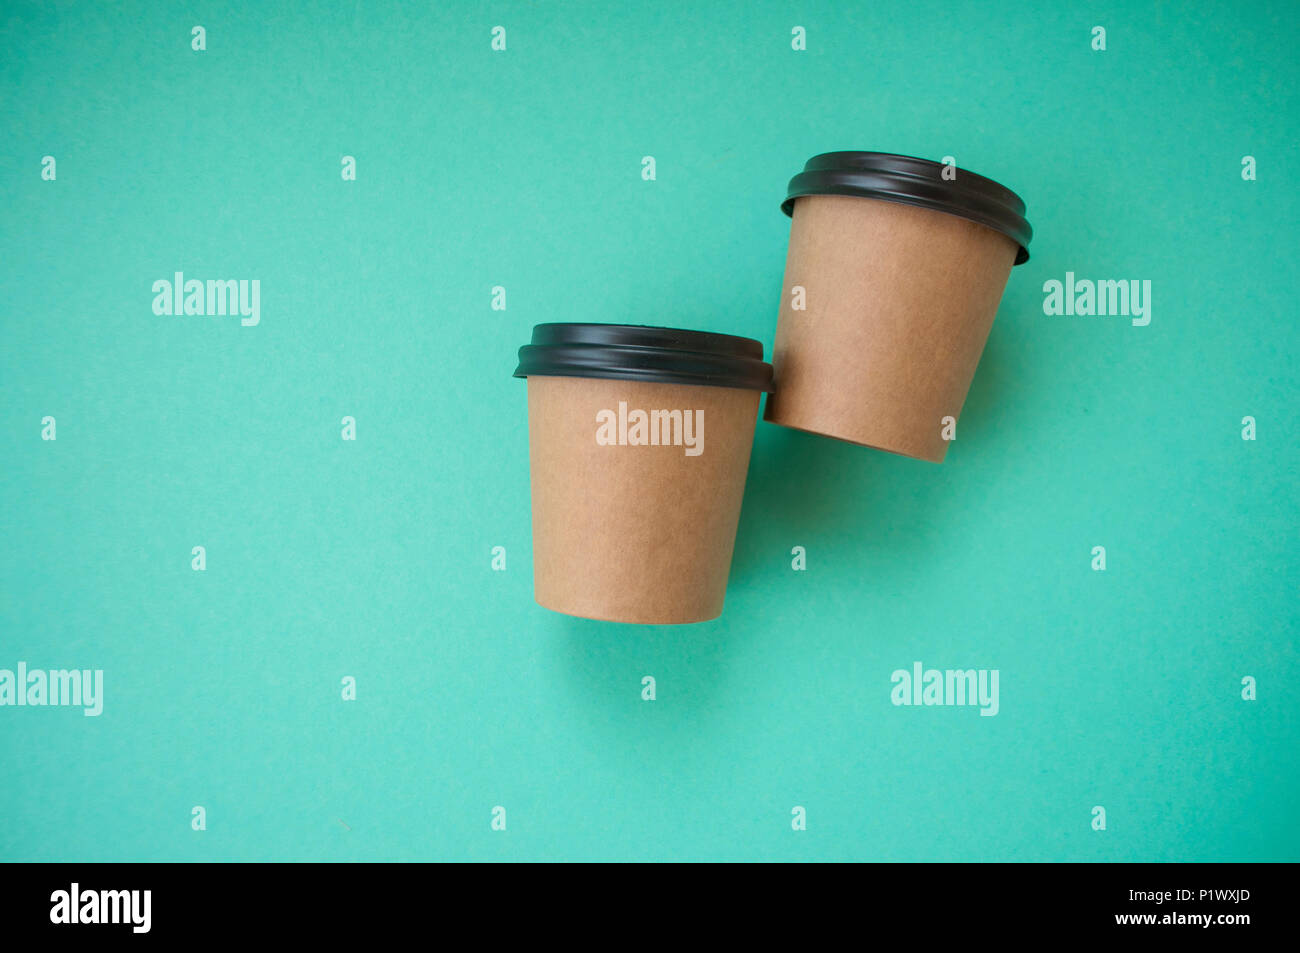 https://c8.alamy.com/comp/P1WXJD/two-paper-cups-for-hot-drinks-on-blue-background-with-text-space-P1WXJD.jpg